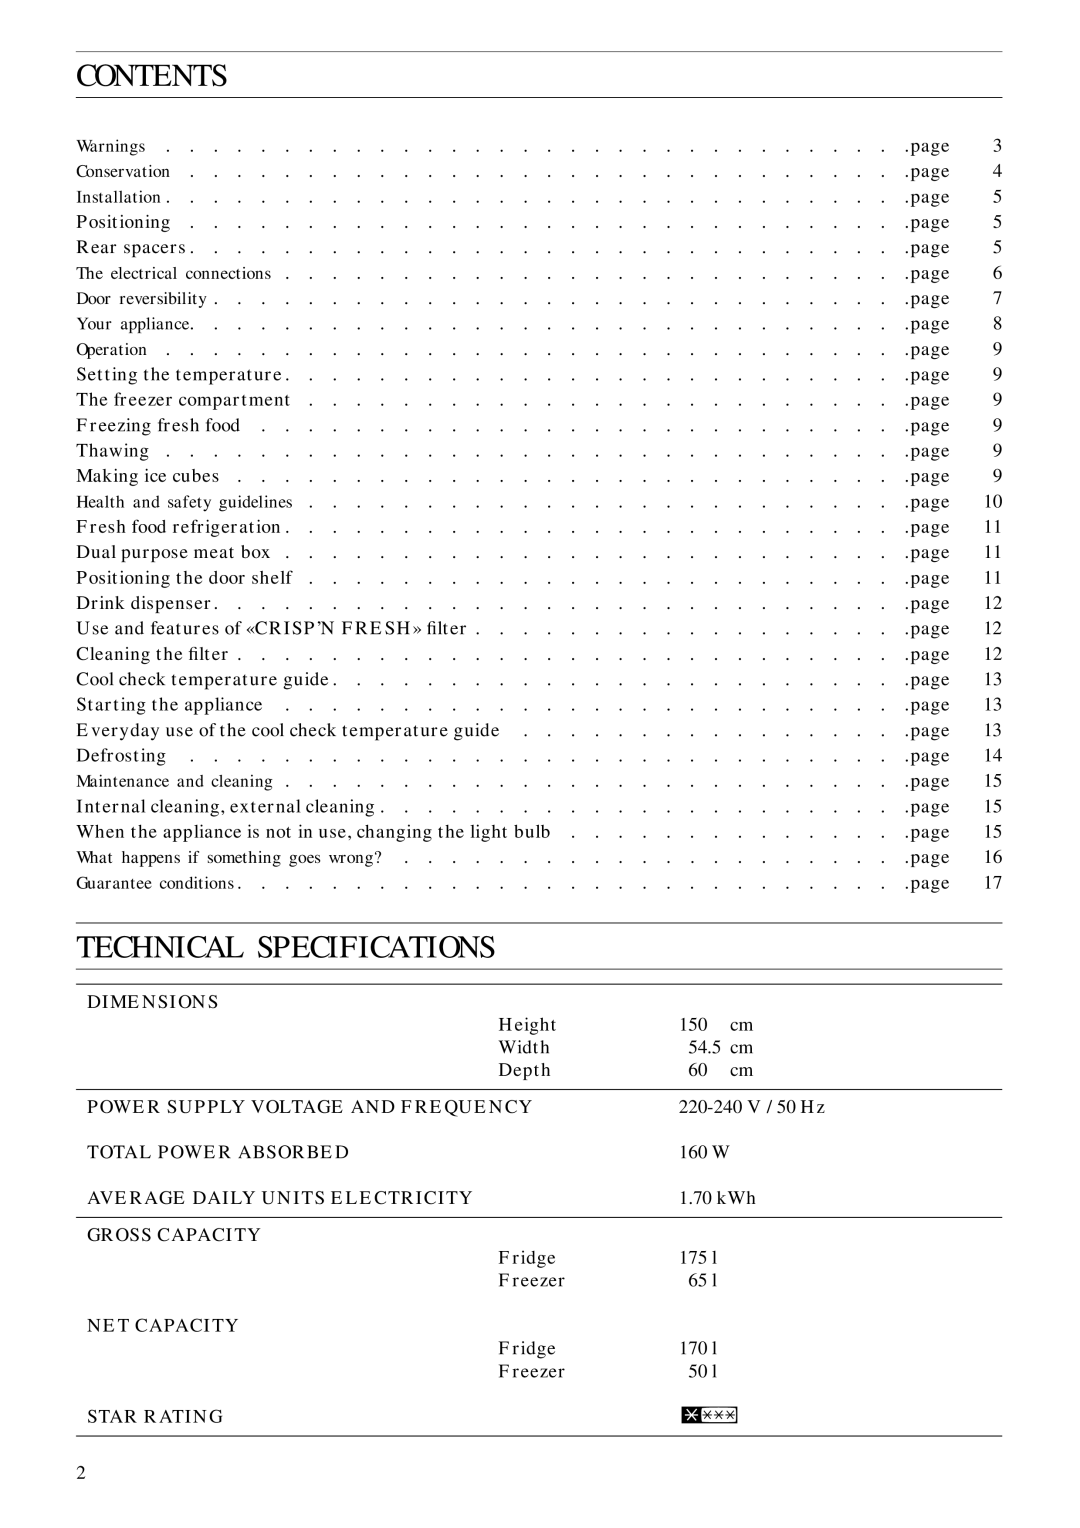 Zanussi ZFC 62/23 FF manual Contents, Technical Specifications 